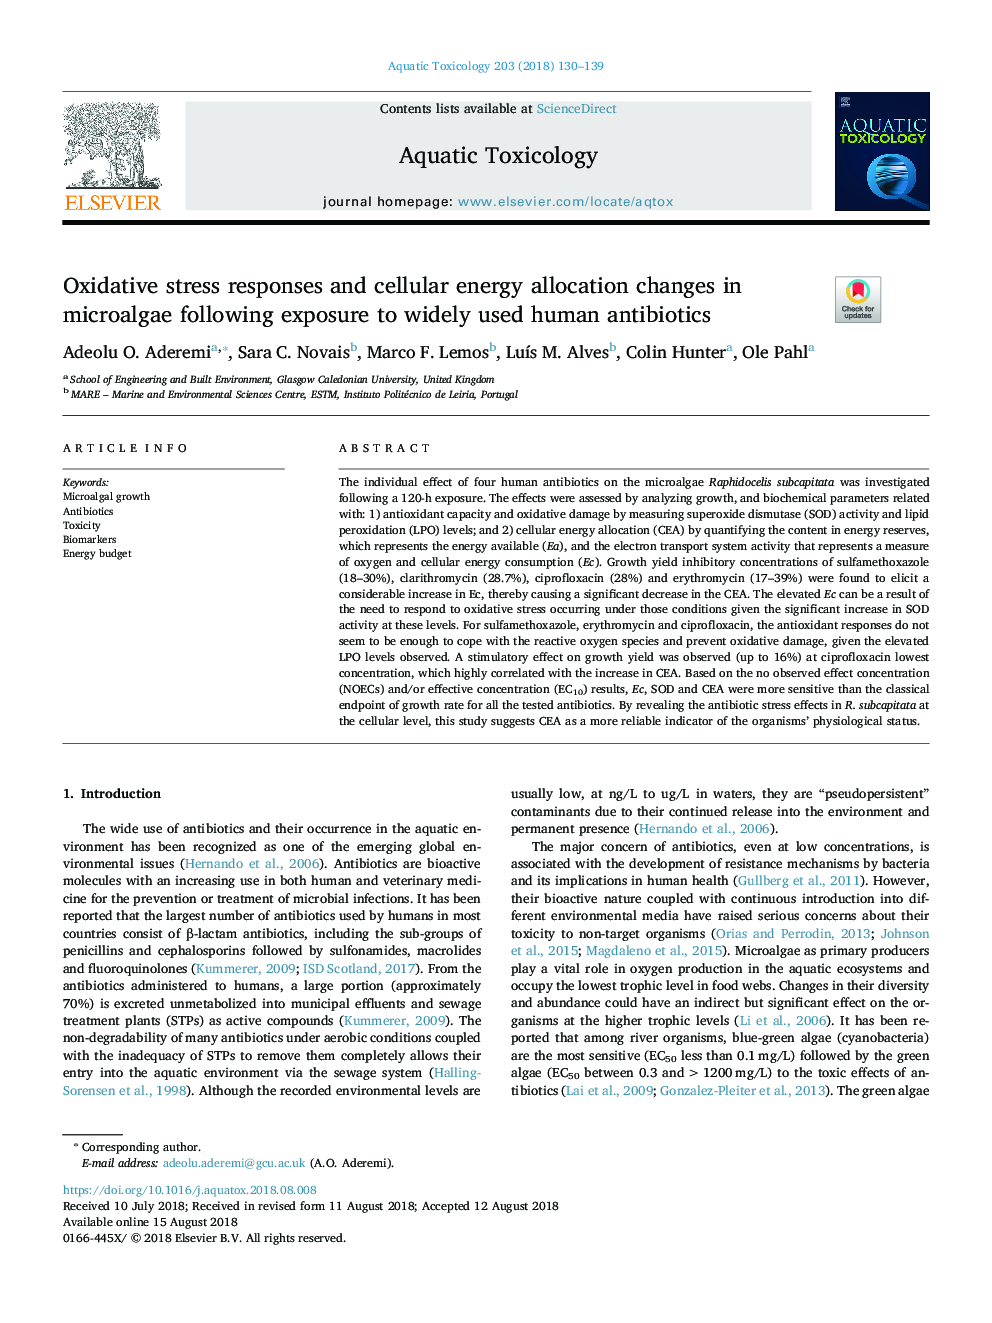 Oxidative stress responses and cellular energy allocation changes in microalgae following exposure to widely used human antibiotics